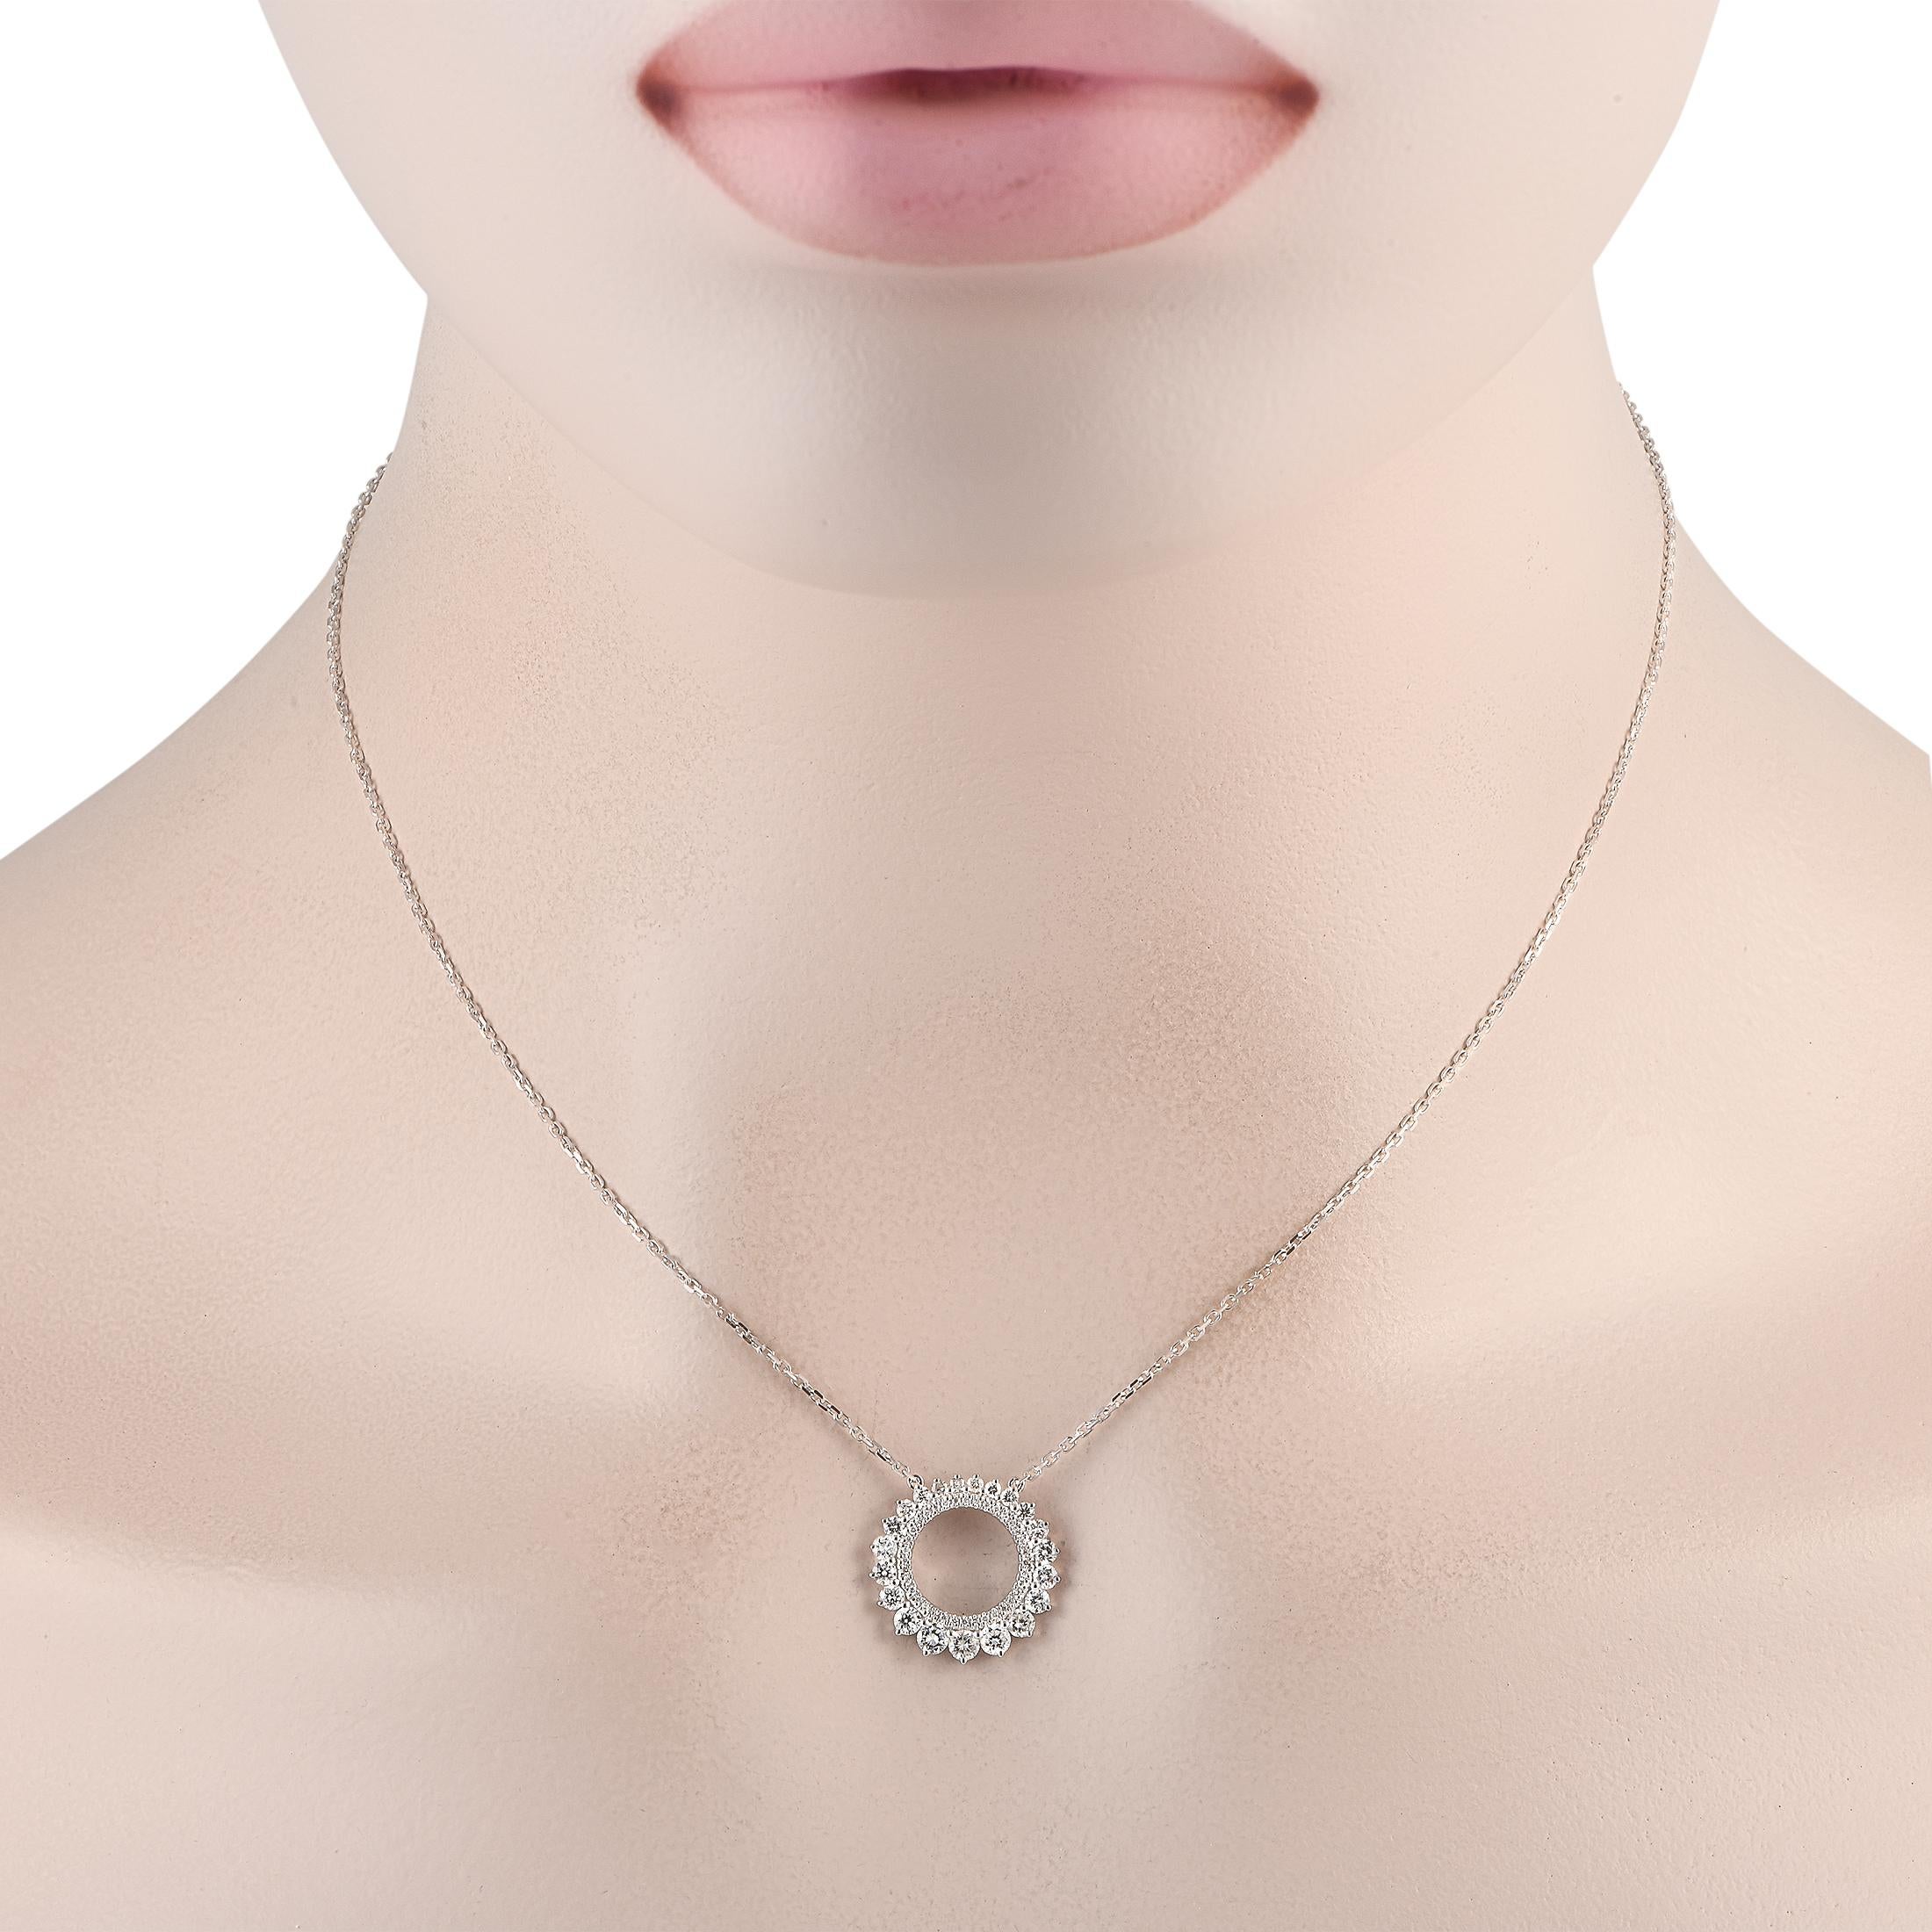 A double halo of diamonds totaling 0.75 carats make this simple, sophisticated necklace simply unforgettable. Suspended at the center of a sleek 15” chain, you’ll find a stunning 18K White Gold circular pendant measuring 0.65” round. 
 
This jewelry